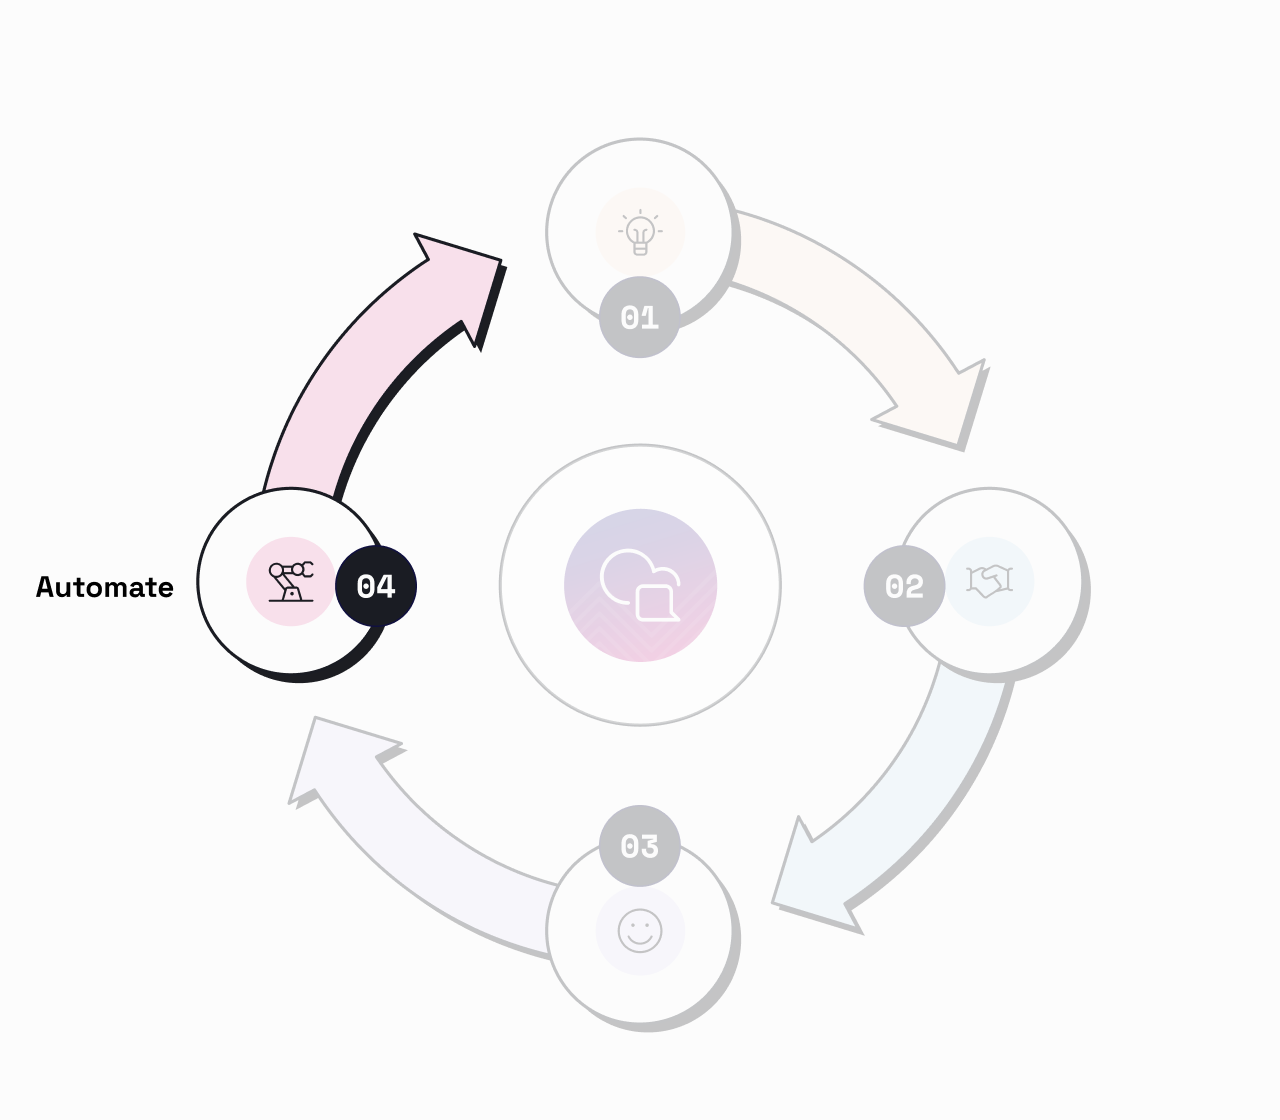 Automate stage of Conversational Flywheel, where AI can help voice solutions scale to reduce friction in the buying journey